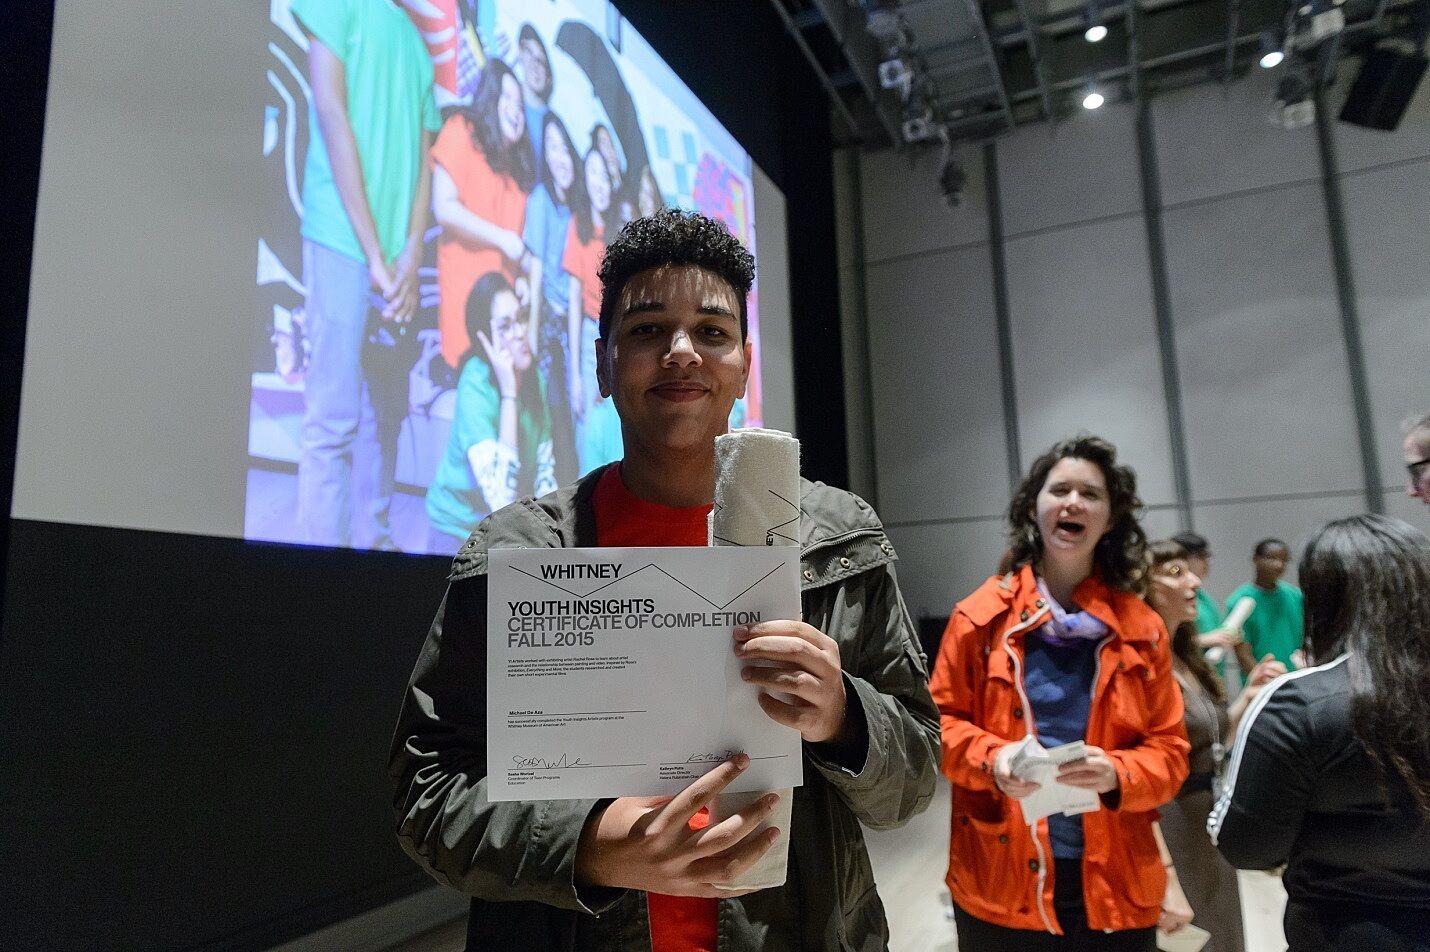 Person holding a certificate with a proud smile, in front of a projected group photo.